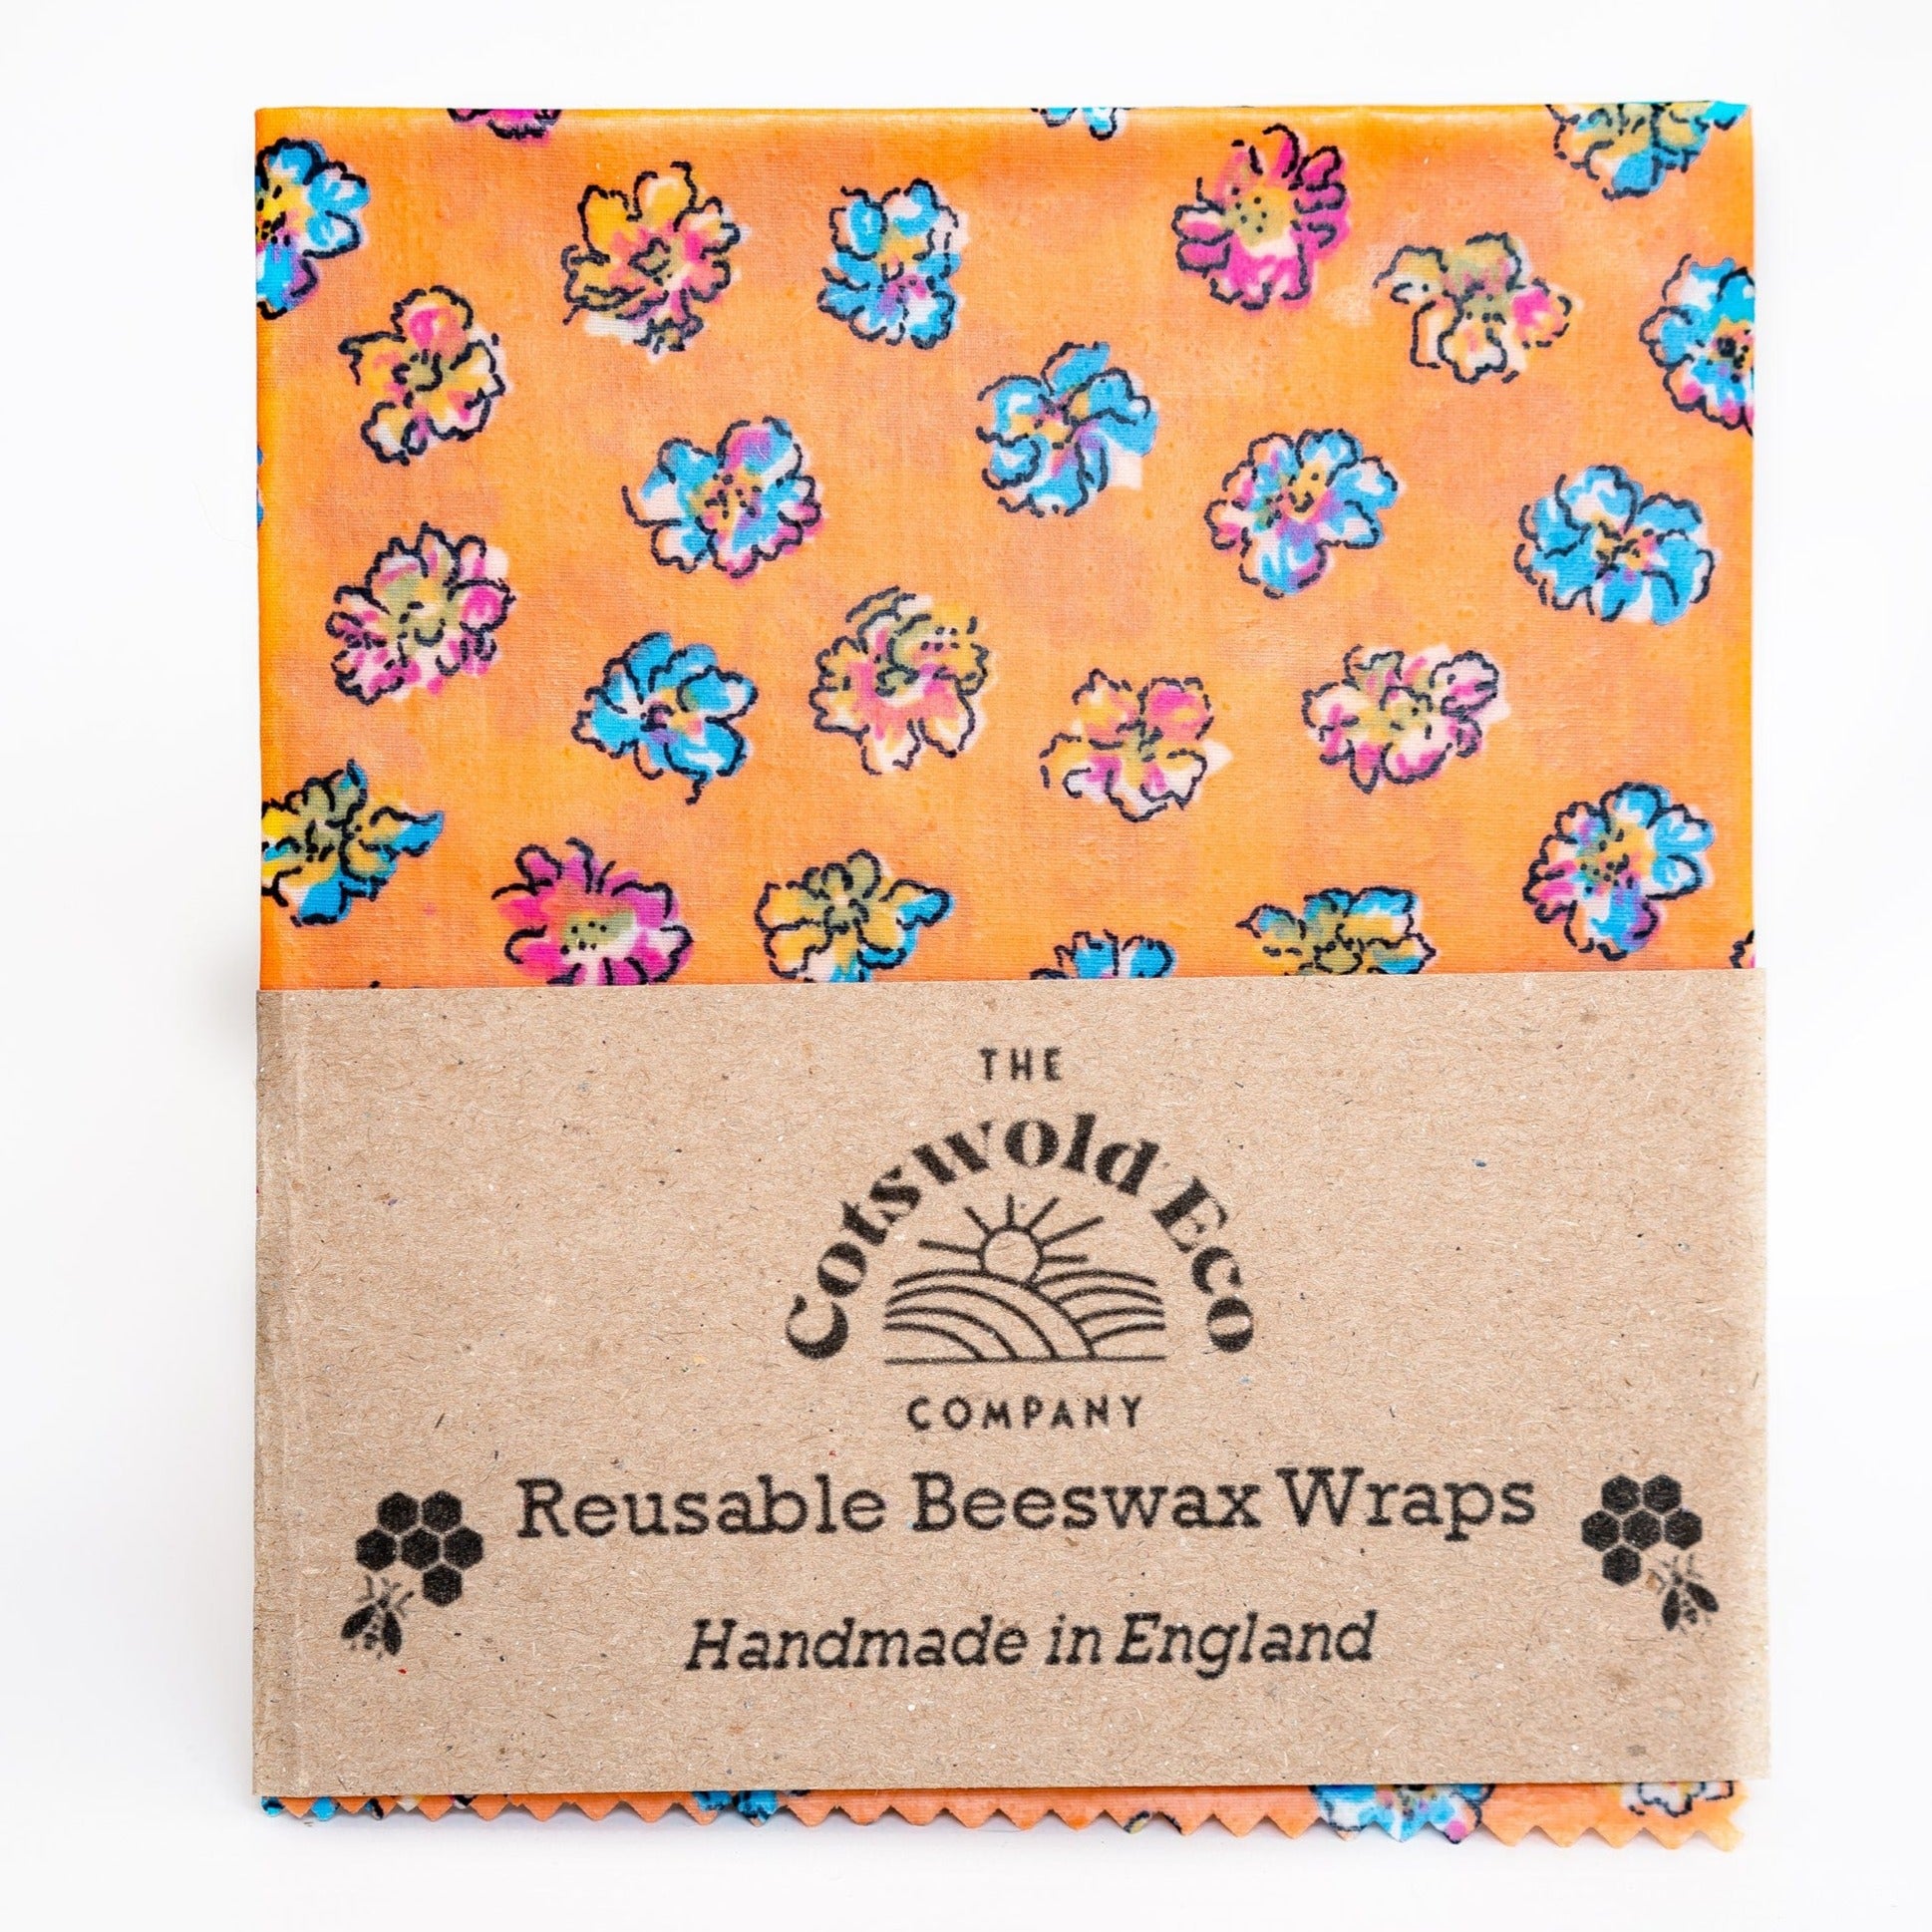 The Cotswold Eco Company Handmade Beeswax Wrap - Red Flowersl